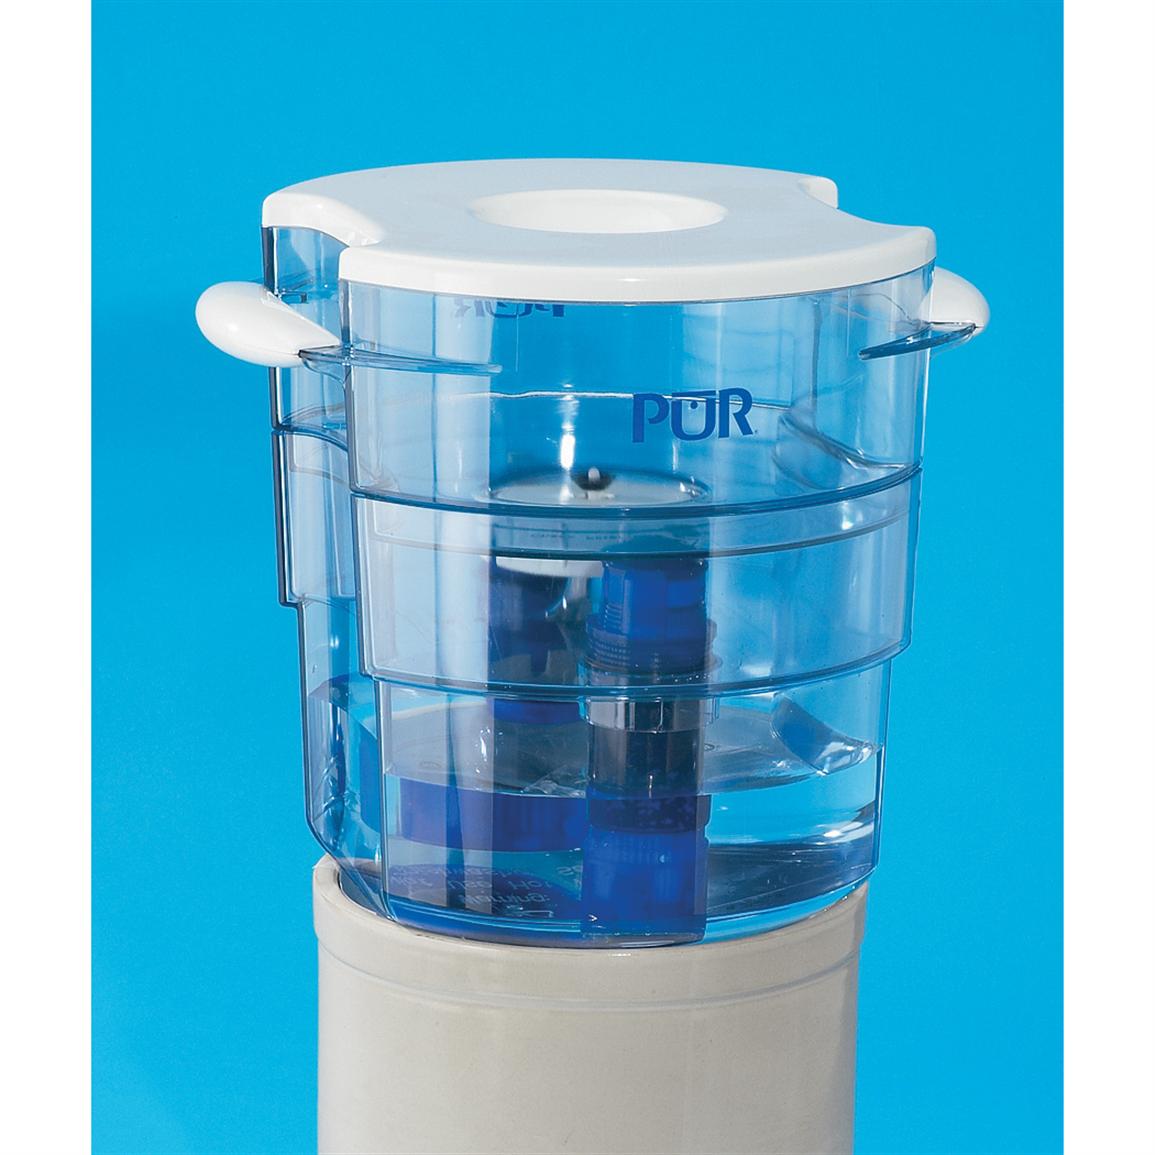 pur-water-bottle-with-8-filters-111795-at-sportsman-s-guide